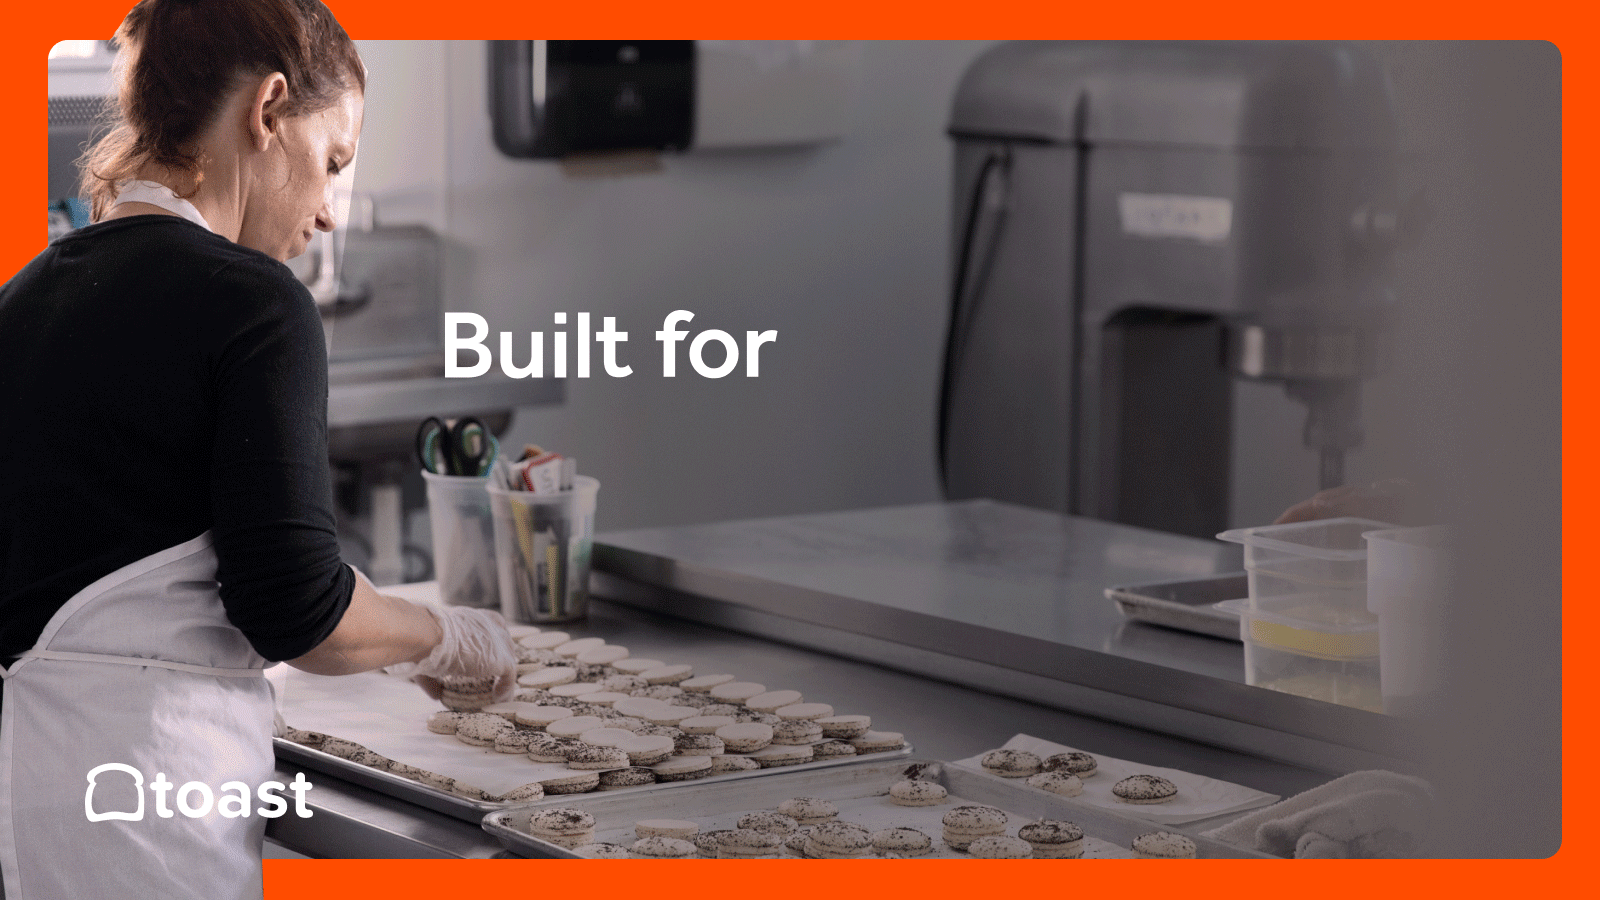 A still image of a woman assembling pastries in a kitchen. The bottom left corner has a white Toast logo. There is an animated overlay that reads, "Built for less time filing out paperwork. Built for more time fulfilling allllll those orders. Now introducing Toast Invoicing."